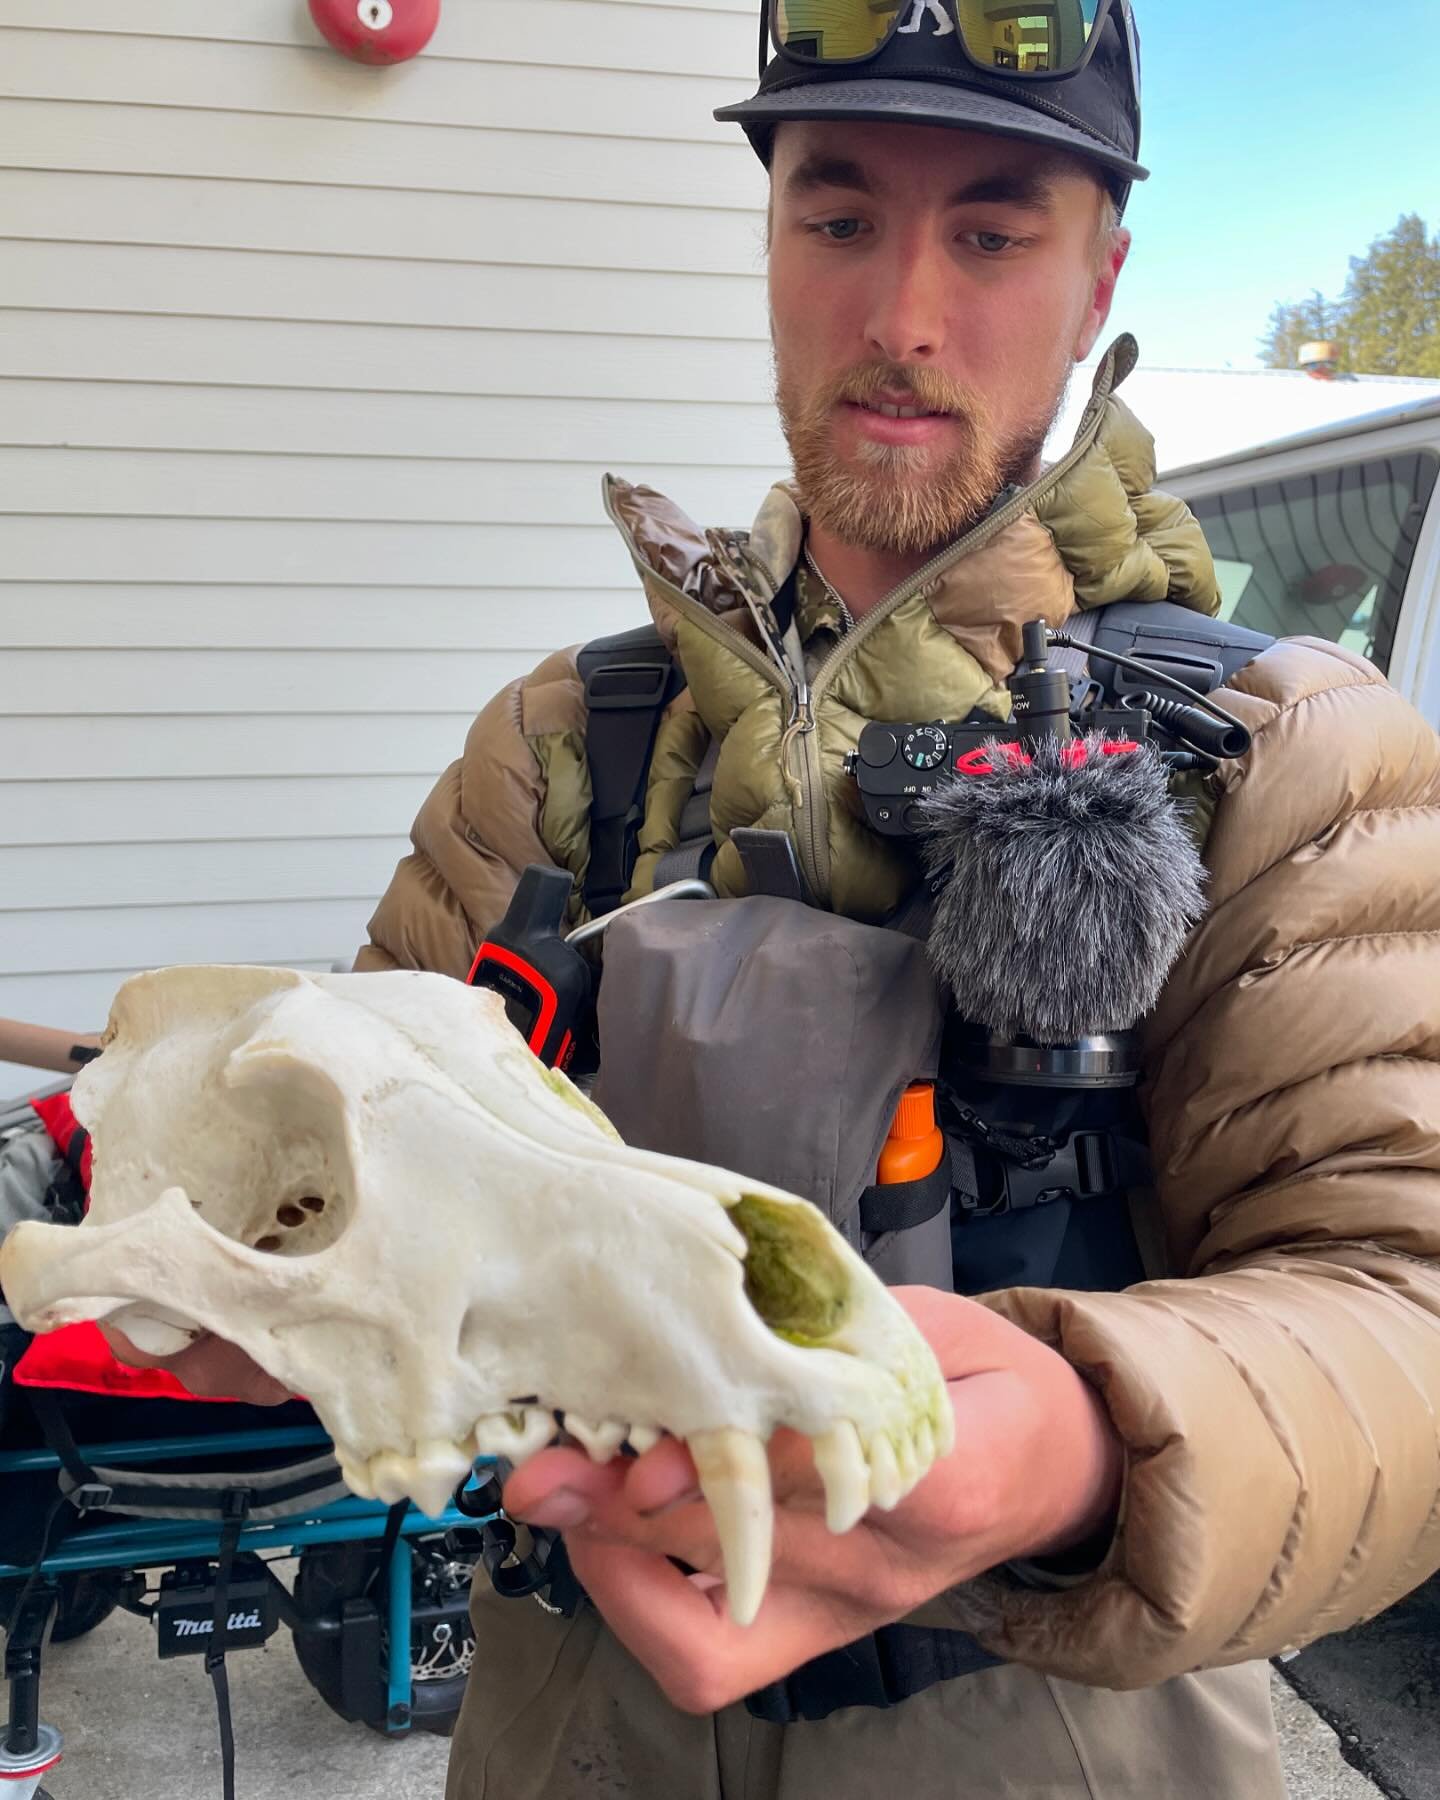 One of our hunting drop offs found this Alexander archipelago Wolf Skull while out looking for spring bears this past week. These animals are extremely resourceful, they are even known to eat sea otters. #alaskahunting #hunting #huntalaska #alaska #w